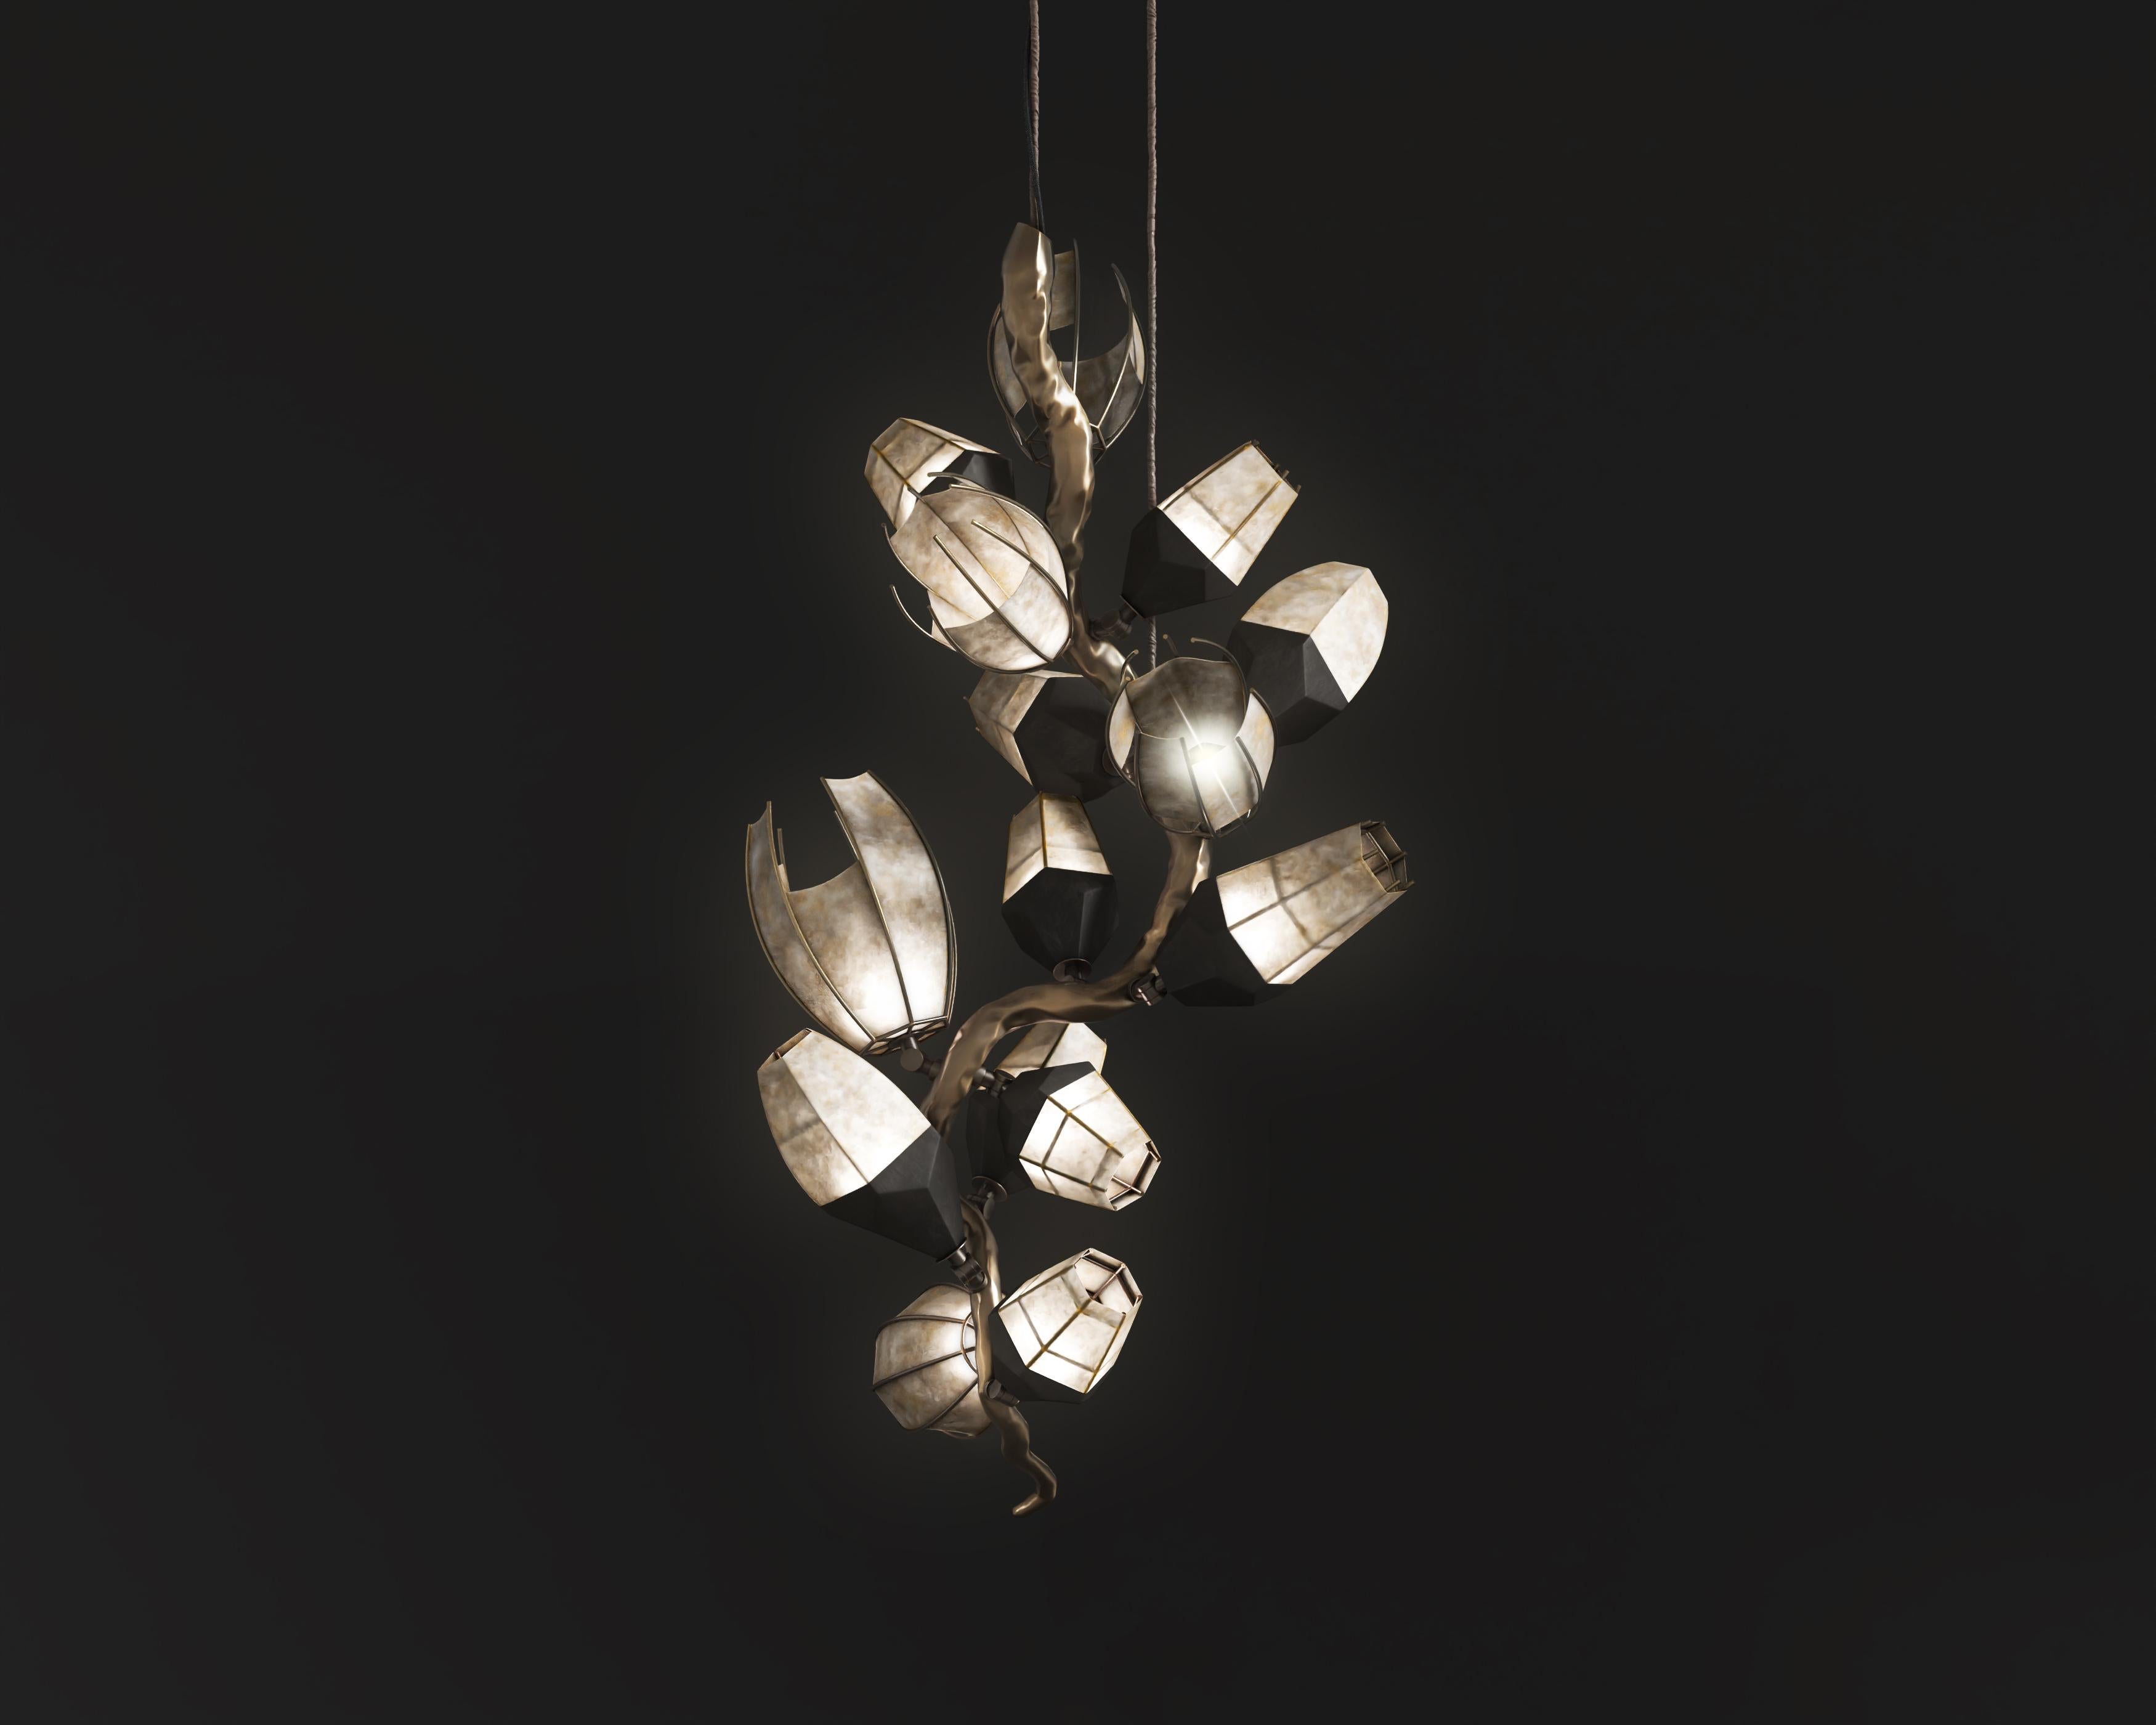 Venomous Vertical Chandelier
The VENOMOUS articular remarkable chandelier is a striking example of the pairing of organic motifs with luxurious design. It is an embodiment of craftsmanship and sophistication. VENOMOUS is chosen for the name of this